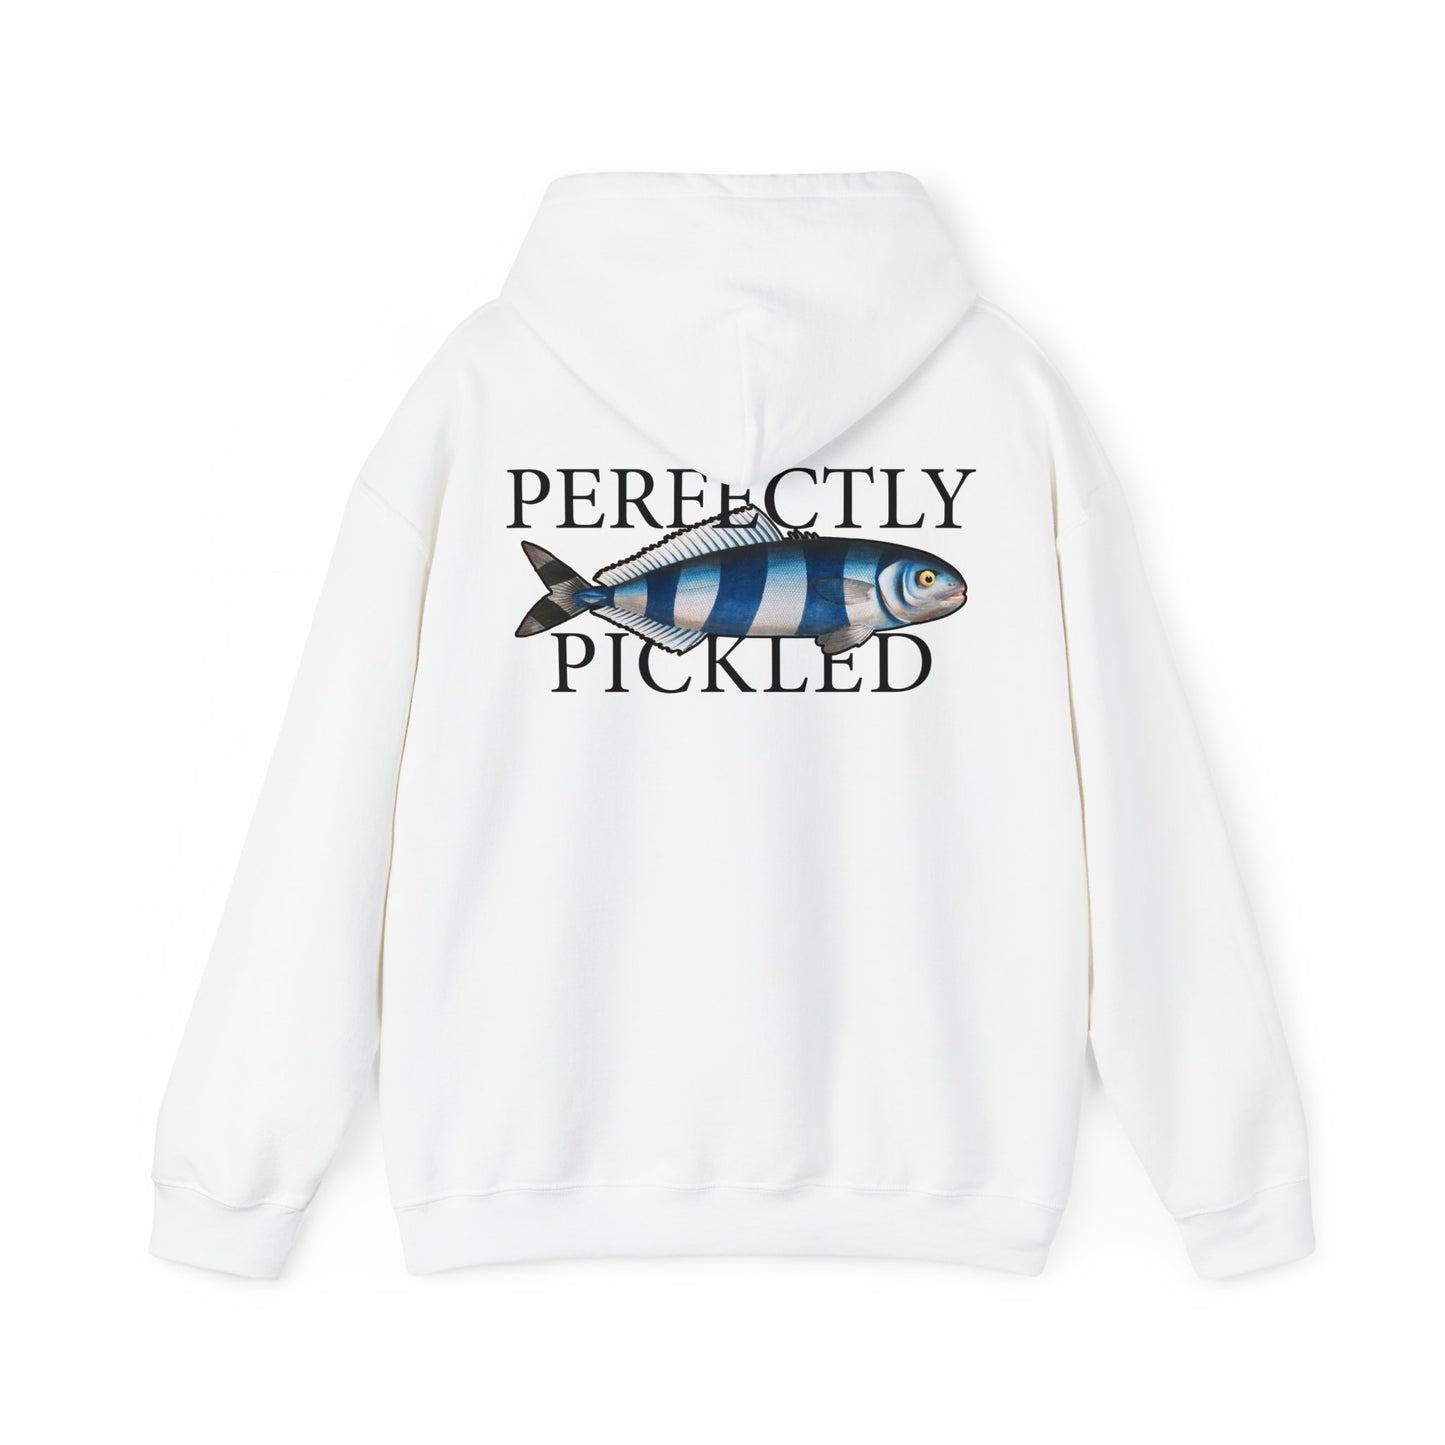 Perfectly Pickled - Hooded Edition